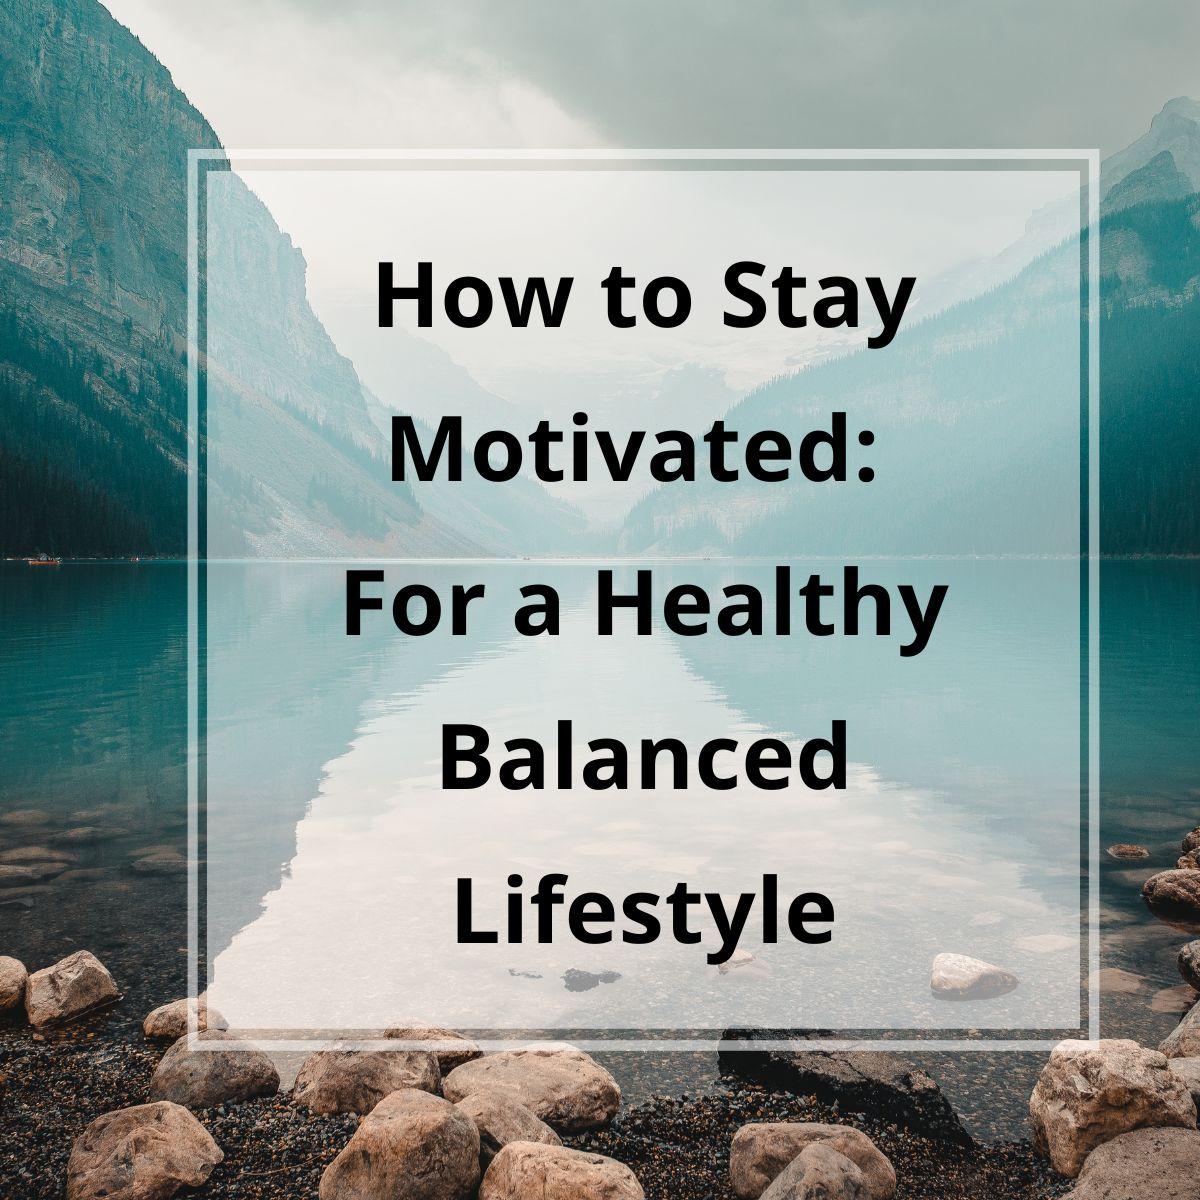 How to Stay Motivated: For a Healthy Balanced Lifestyle